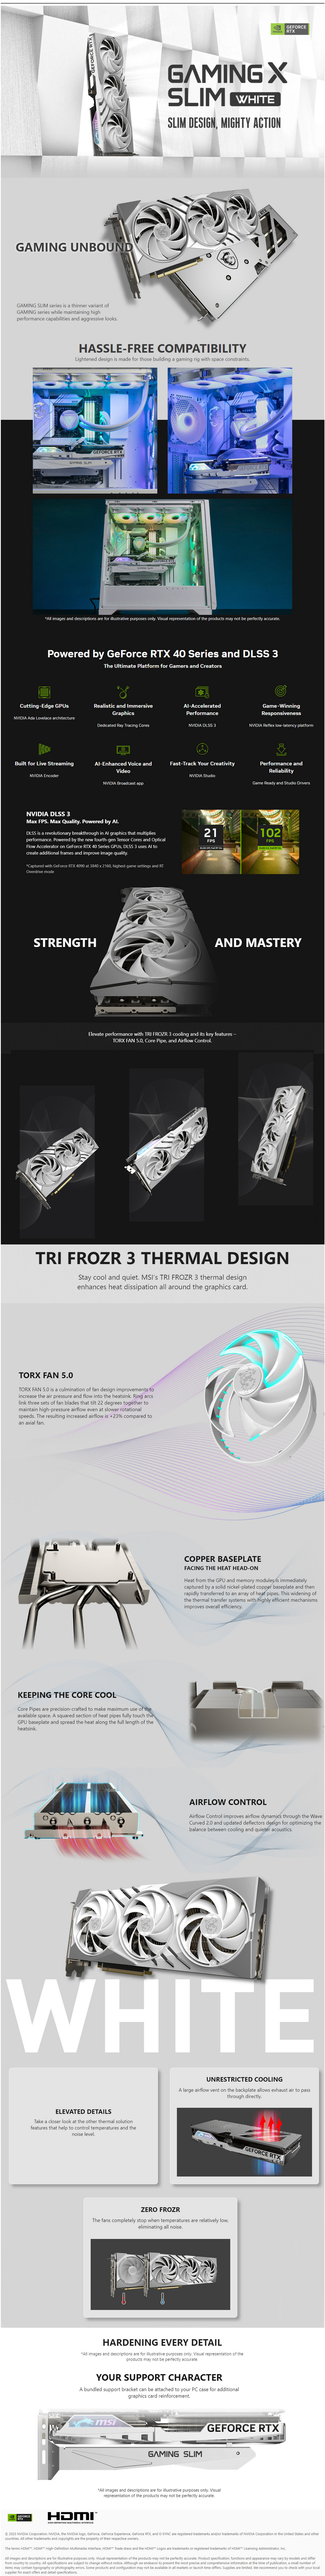 A large marketing image providing additional information about the product MSI GeForce RTX 4060 Ti Gaming X Slim 8GB GDDR6 - White - Additional alt info not provided